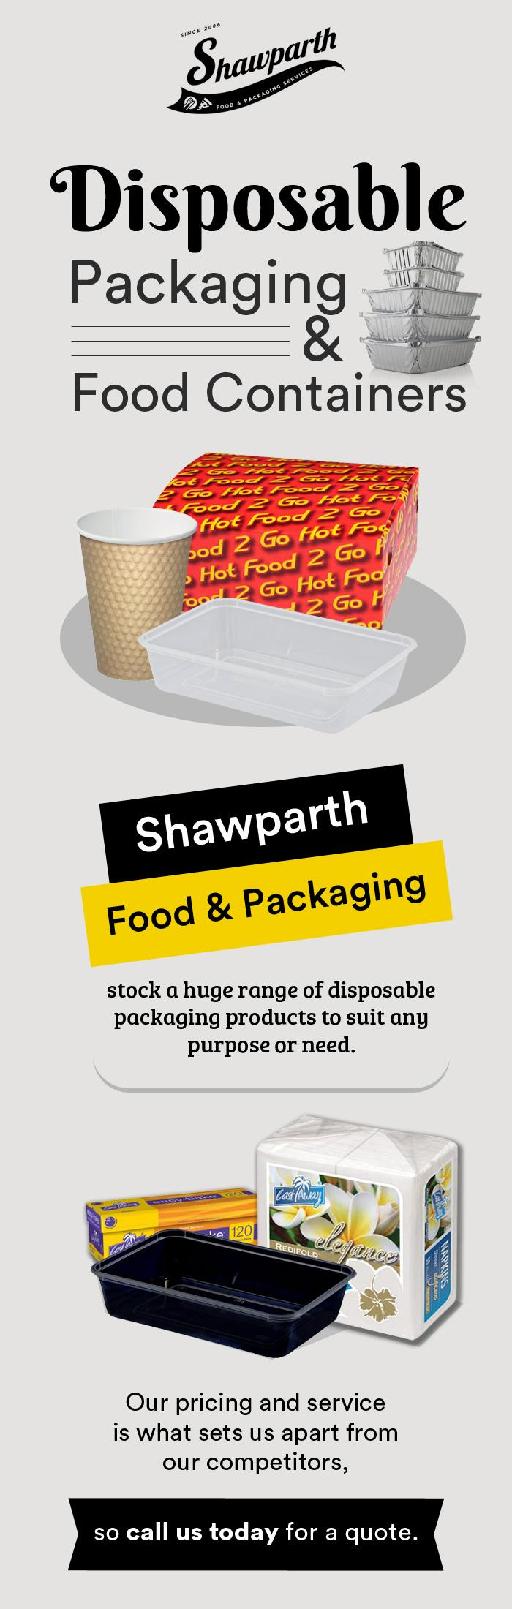 Buy Disposable Packaging Products in Brisbane from Shawparth Food & Packaging Services